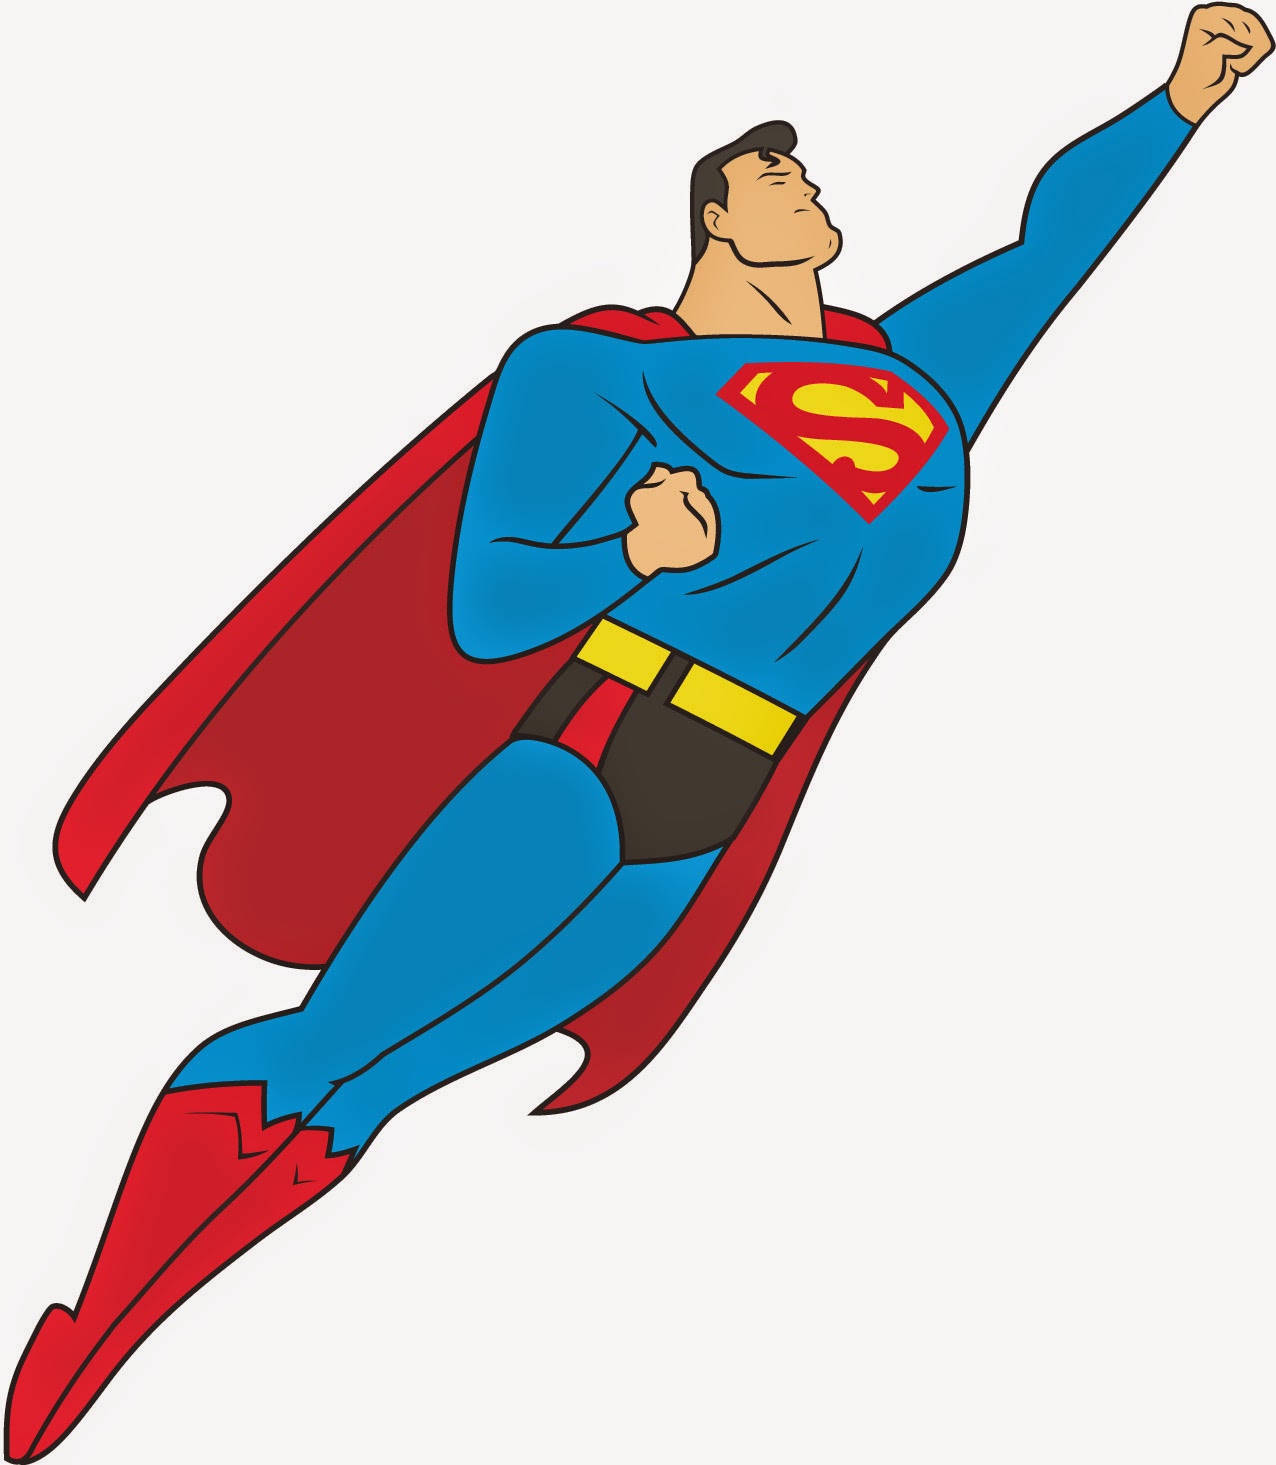 100+] Superman Png Images | Wallpapers.com